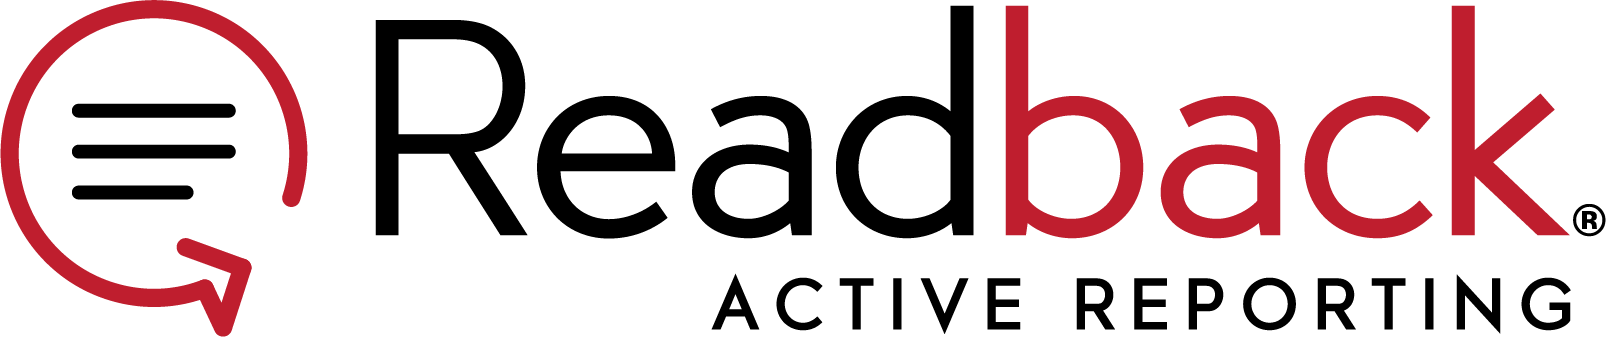 The Readback logo. Text on transparent background with the Readback logo image to the left side. Readback text at the top and then Active reporting at the bottom.